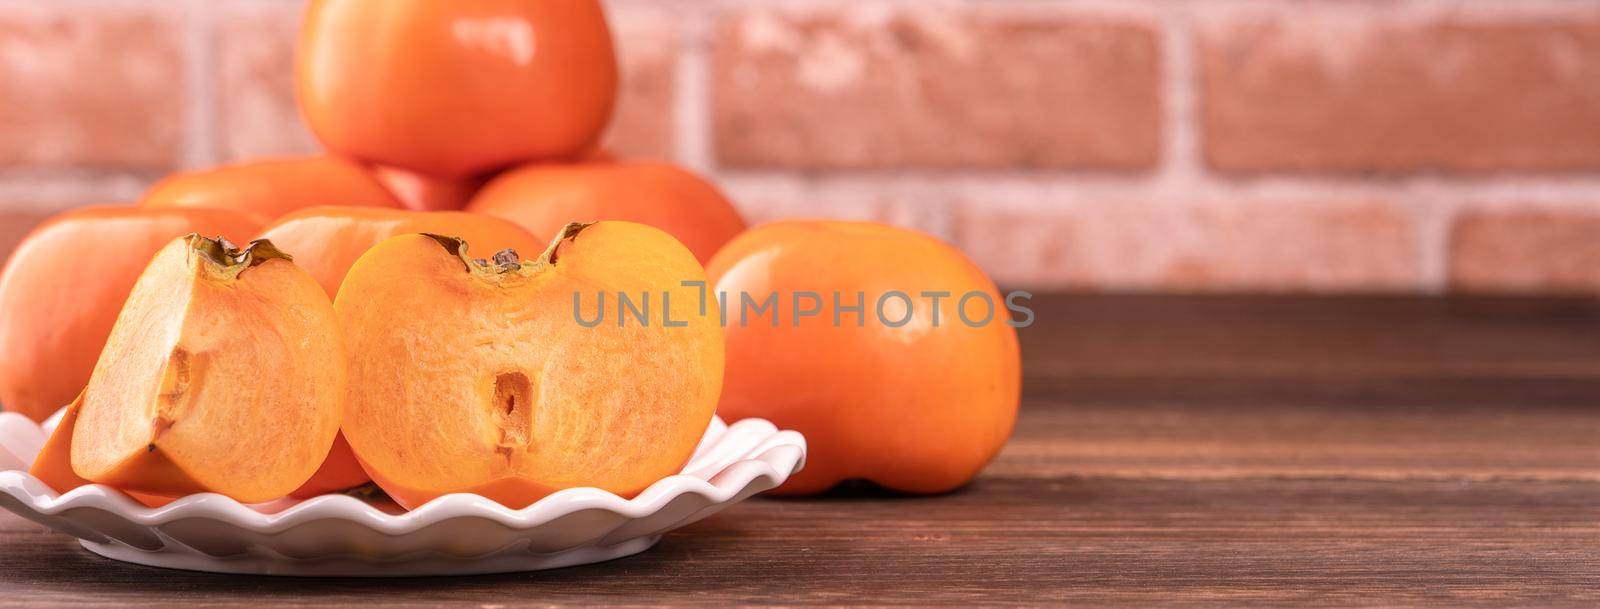 Sliced sweet persimmon kaki in a bamboo sieve basket on dark wooden table with red brick wall background, Chinese lunar new year fruit design concept, close up. by ROMIXIMAGE